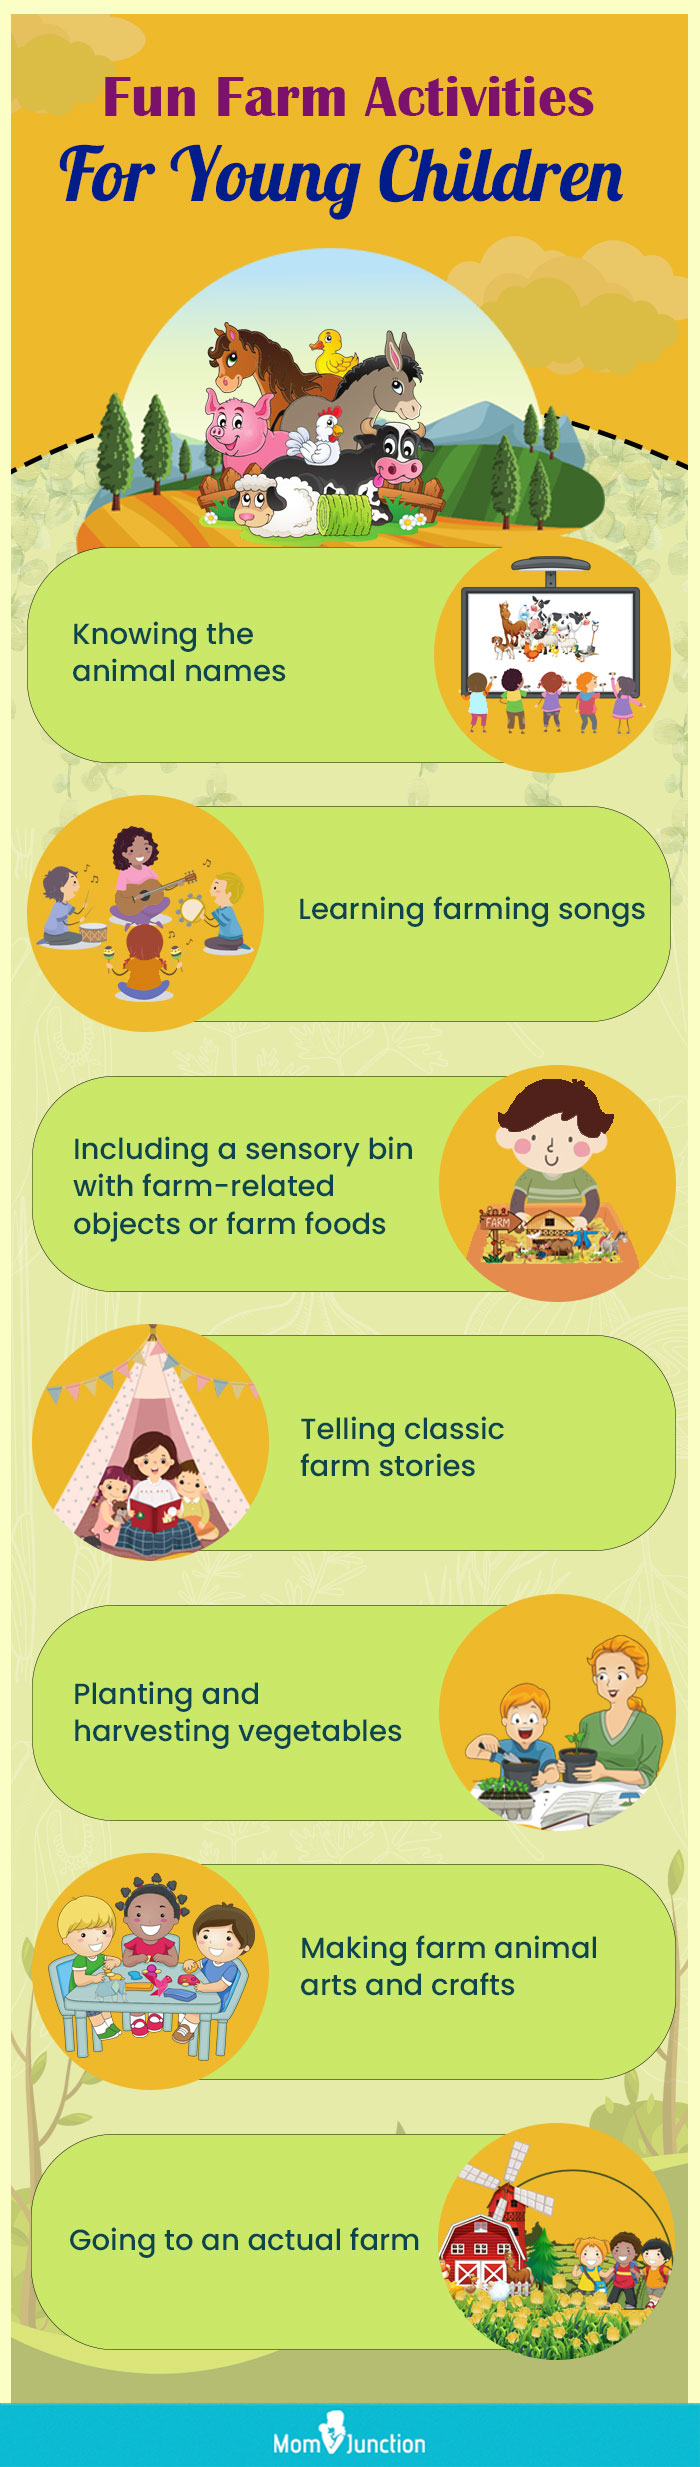 fun farm activities for young children (infographic)